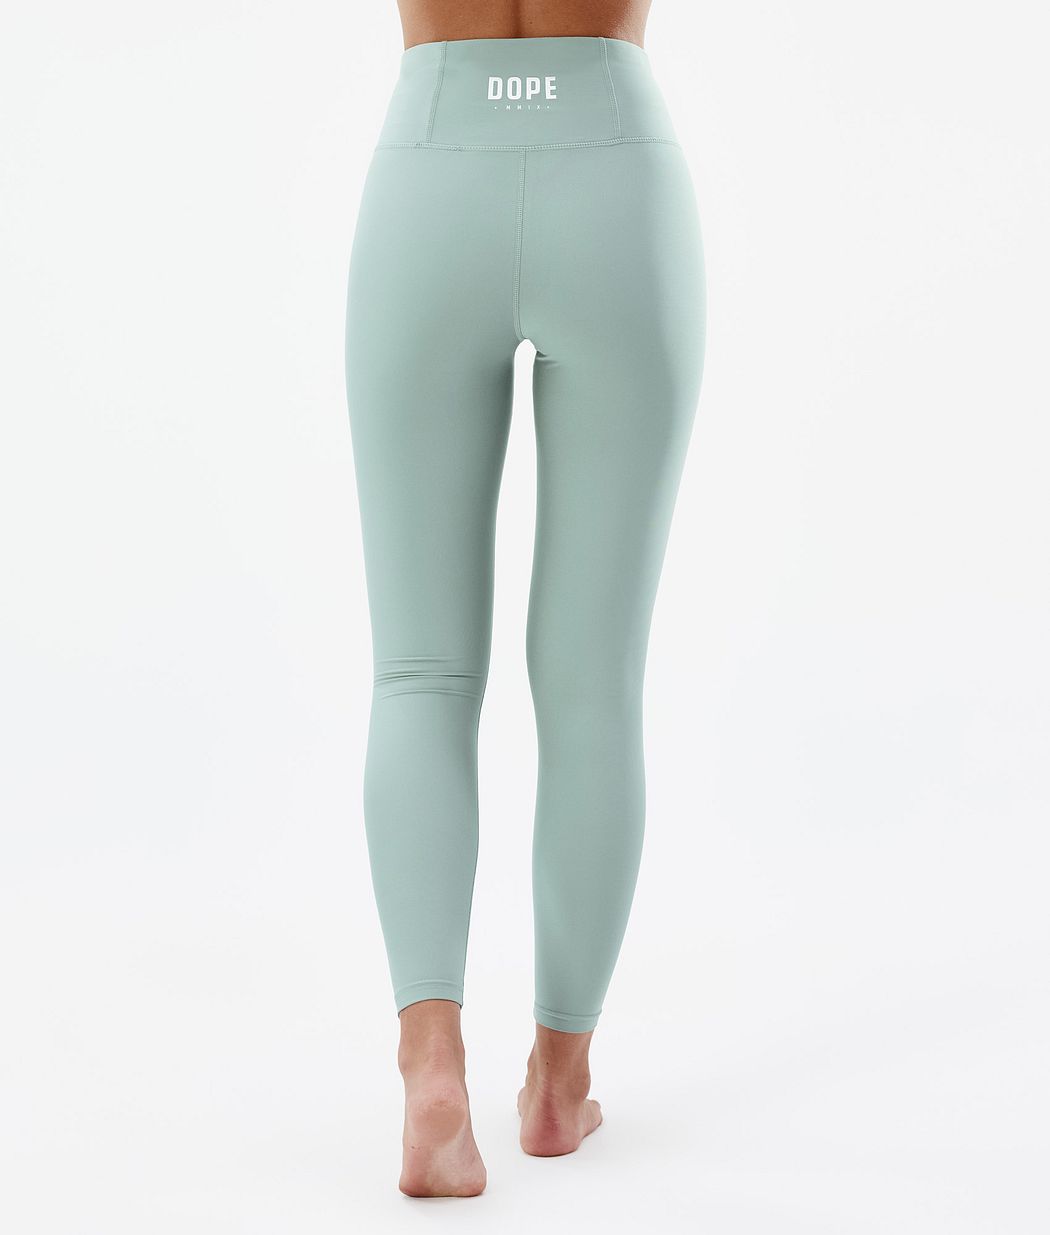 Snuggle W Base Layer Pant Women 2X-Up Faded Green